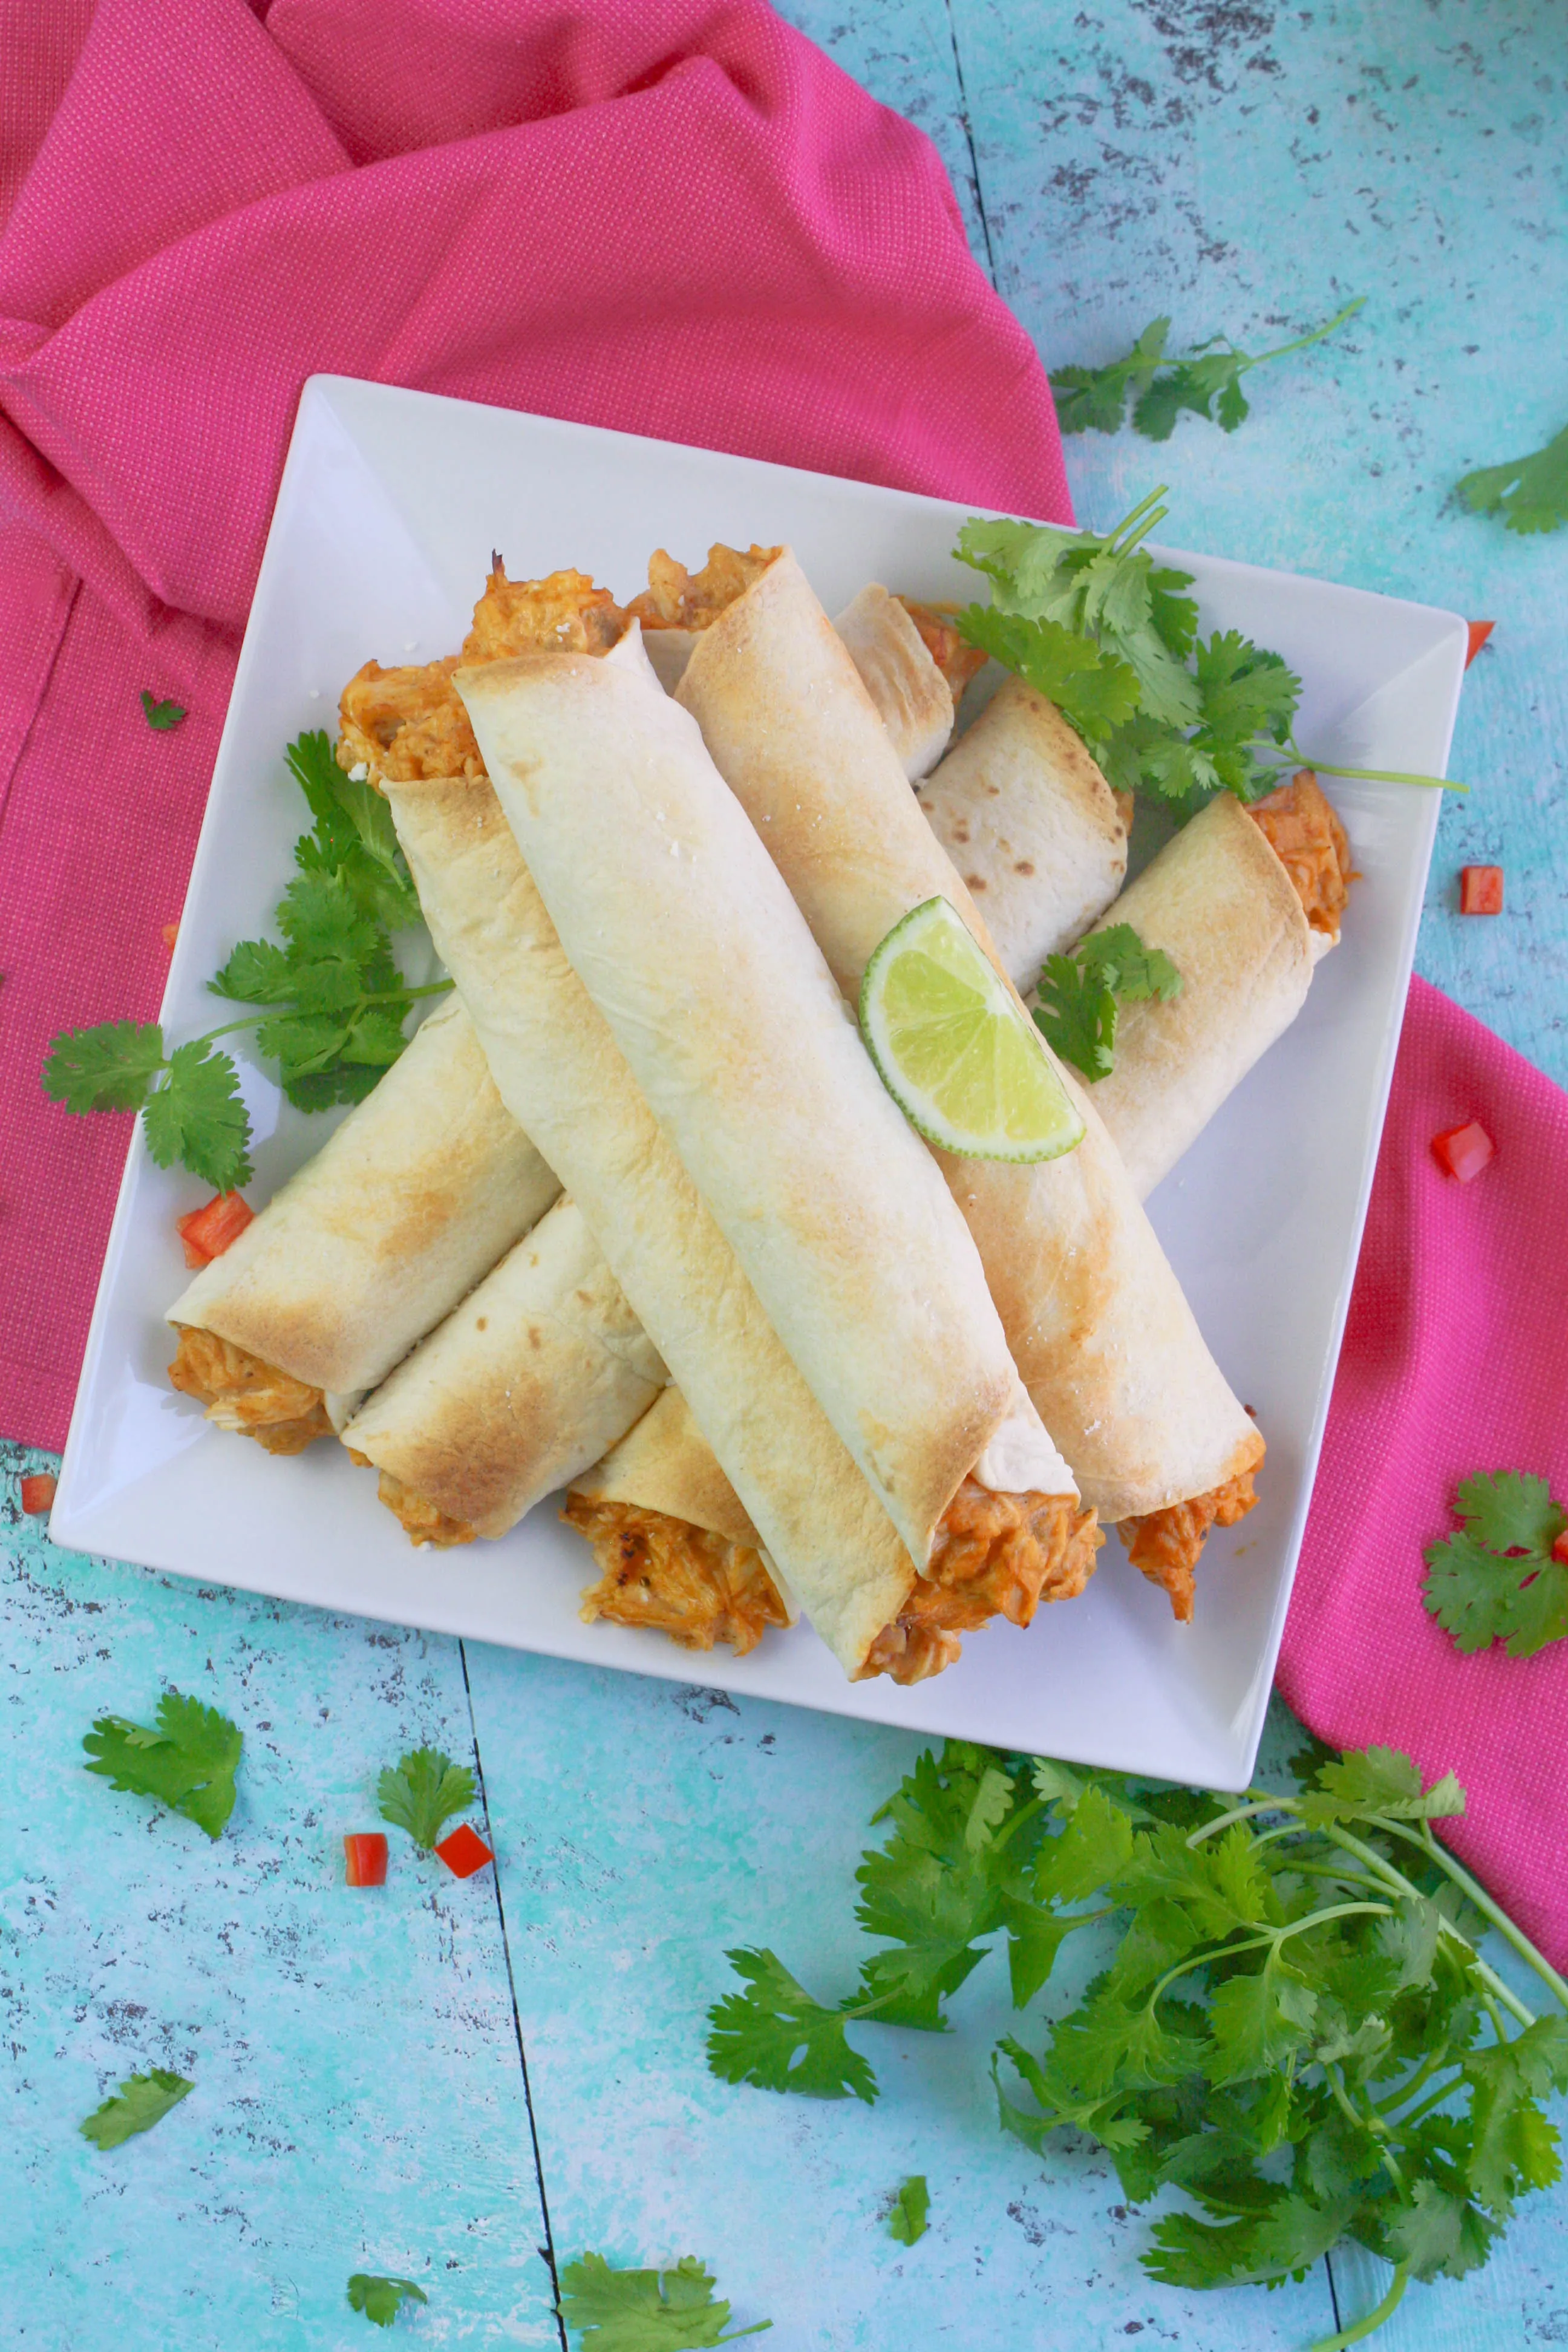 Baked Chicken and Green Chile Taquitos are a treat you will enjoy for a snack or meal. Baked Chicken and Green Chile Taquitos are fun to serve with all sorts of toppings!